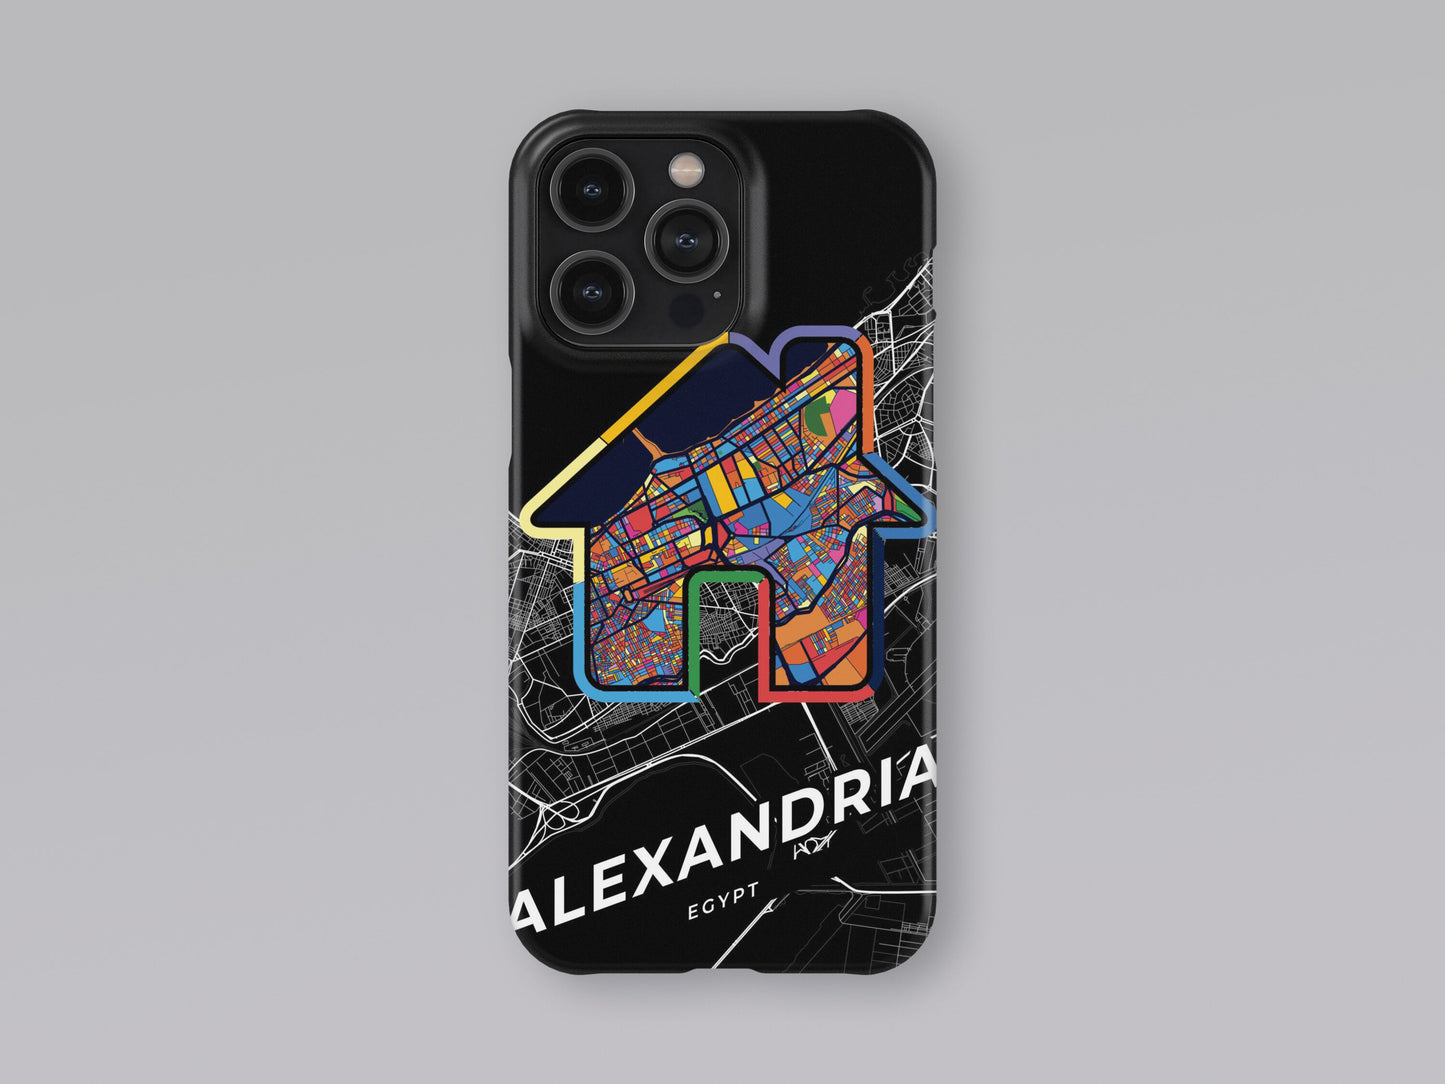 Alexandria Egypt slim phone case with colorful icon. Birthday, wedding or housewarming gift. Couple match cases. 3